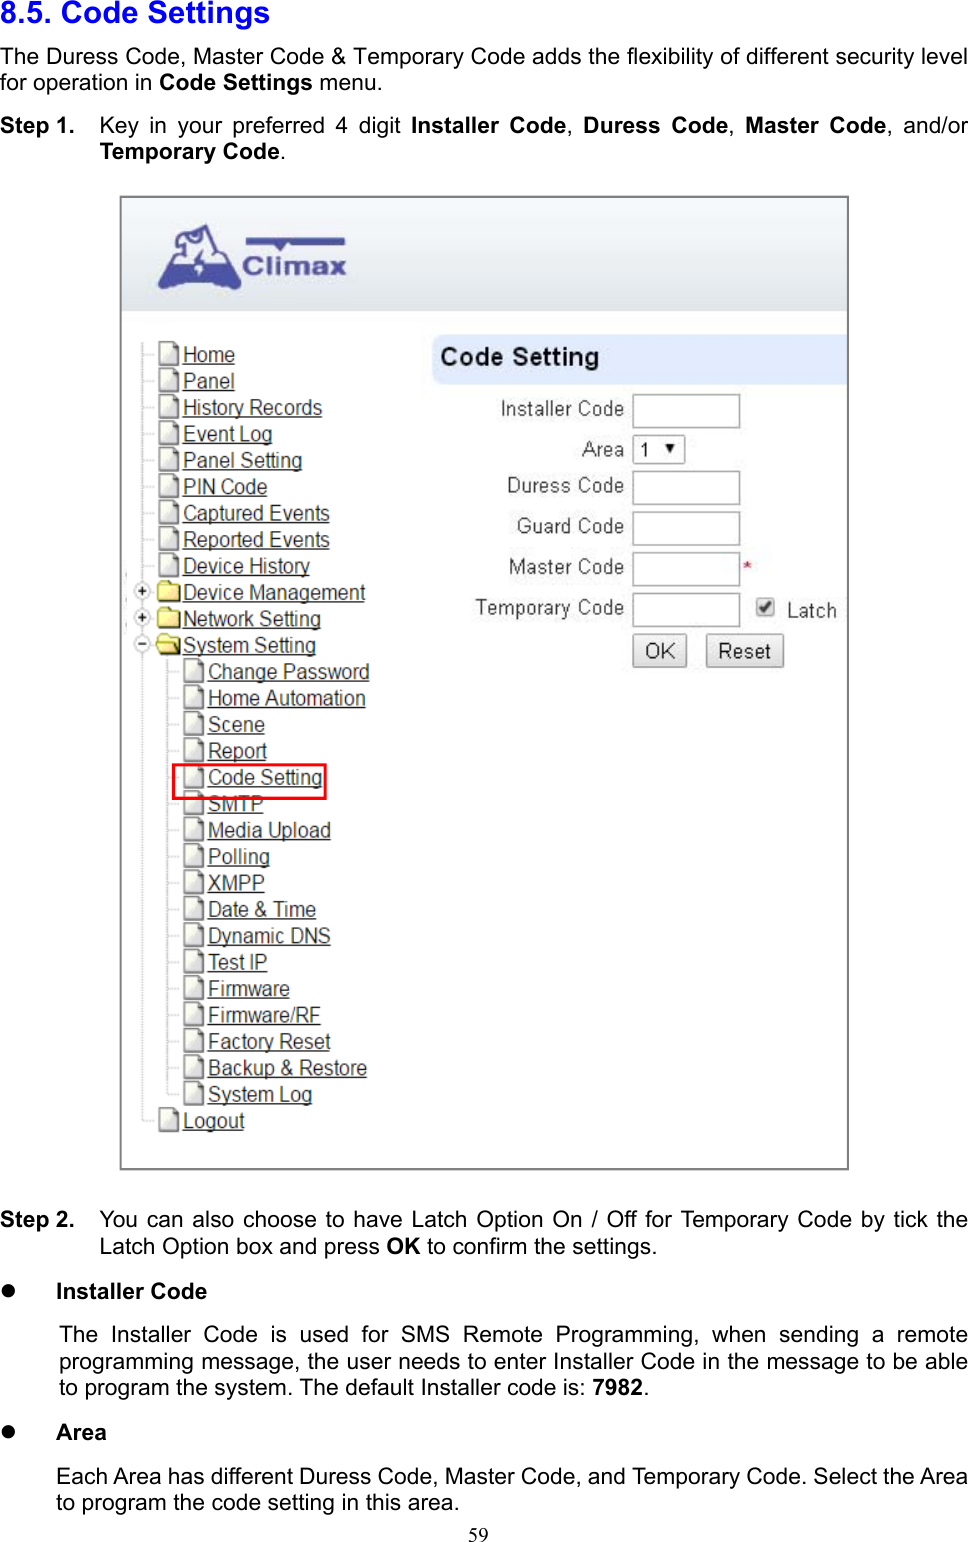  598.5. Code Settings   The Duress Code, Master Code &amp; Temporary Code adds the flexibility of different security level for operation in Code Settings menu. Step 1.  Key  in  your  preferred  4  digit  Installer  Code,  Duress  Code,  Master  Code,  and/or Temporary Code.  Step 2.  You can also choose to have Latch Option On / Off for Temporary Code by tick the Latch Option box and press OK to confirm the settings.    Installer Code The  Installer  Code  is  used  for  SMS  Remote  Programming,  when  sending  a  remote programming message, the user needs to enter Installer Code in the message to be able to program the system. The default Installer code is: 7982.  Area Each Area has different Duress Code, Master Code, and Temporary Code. Select the Area to program the code setting in this area. 